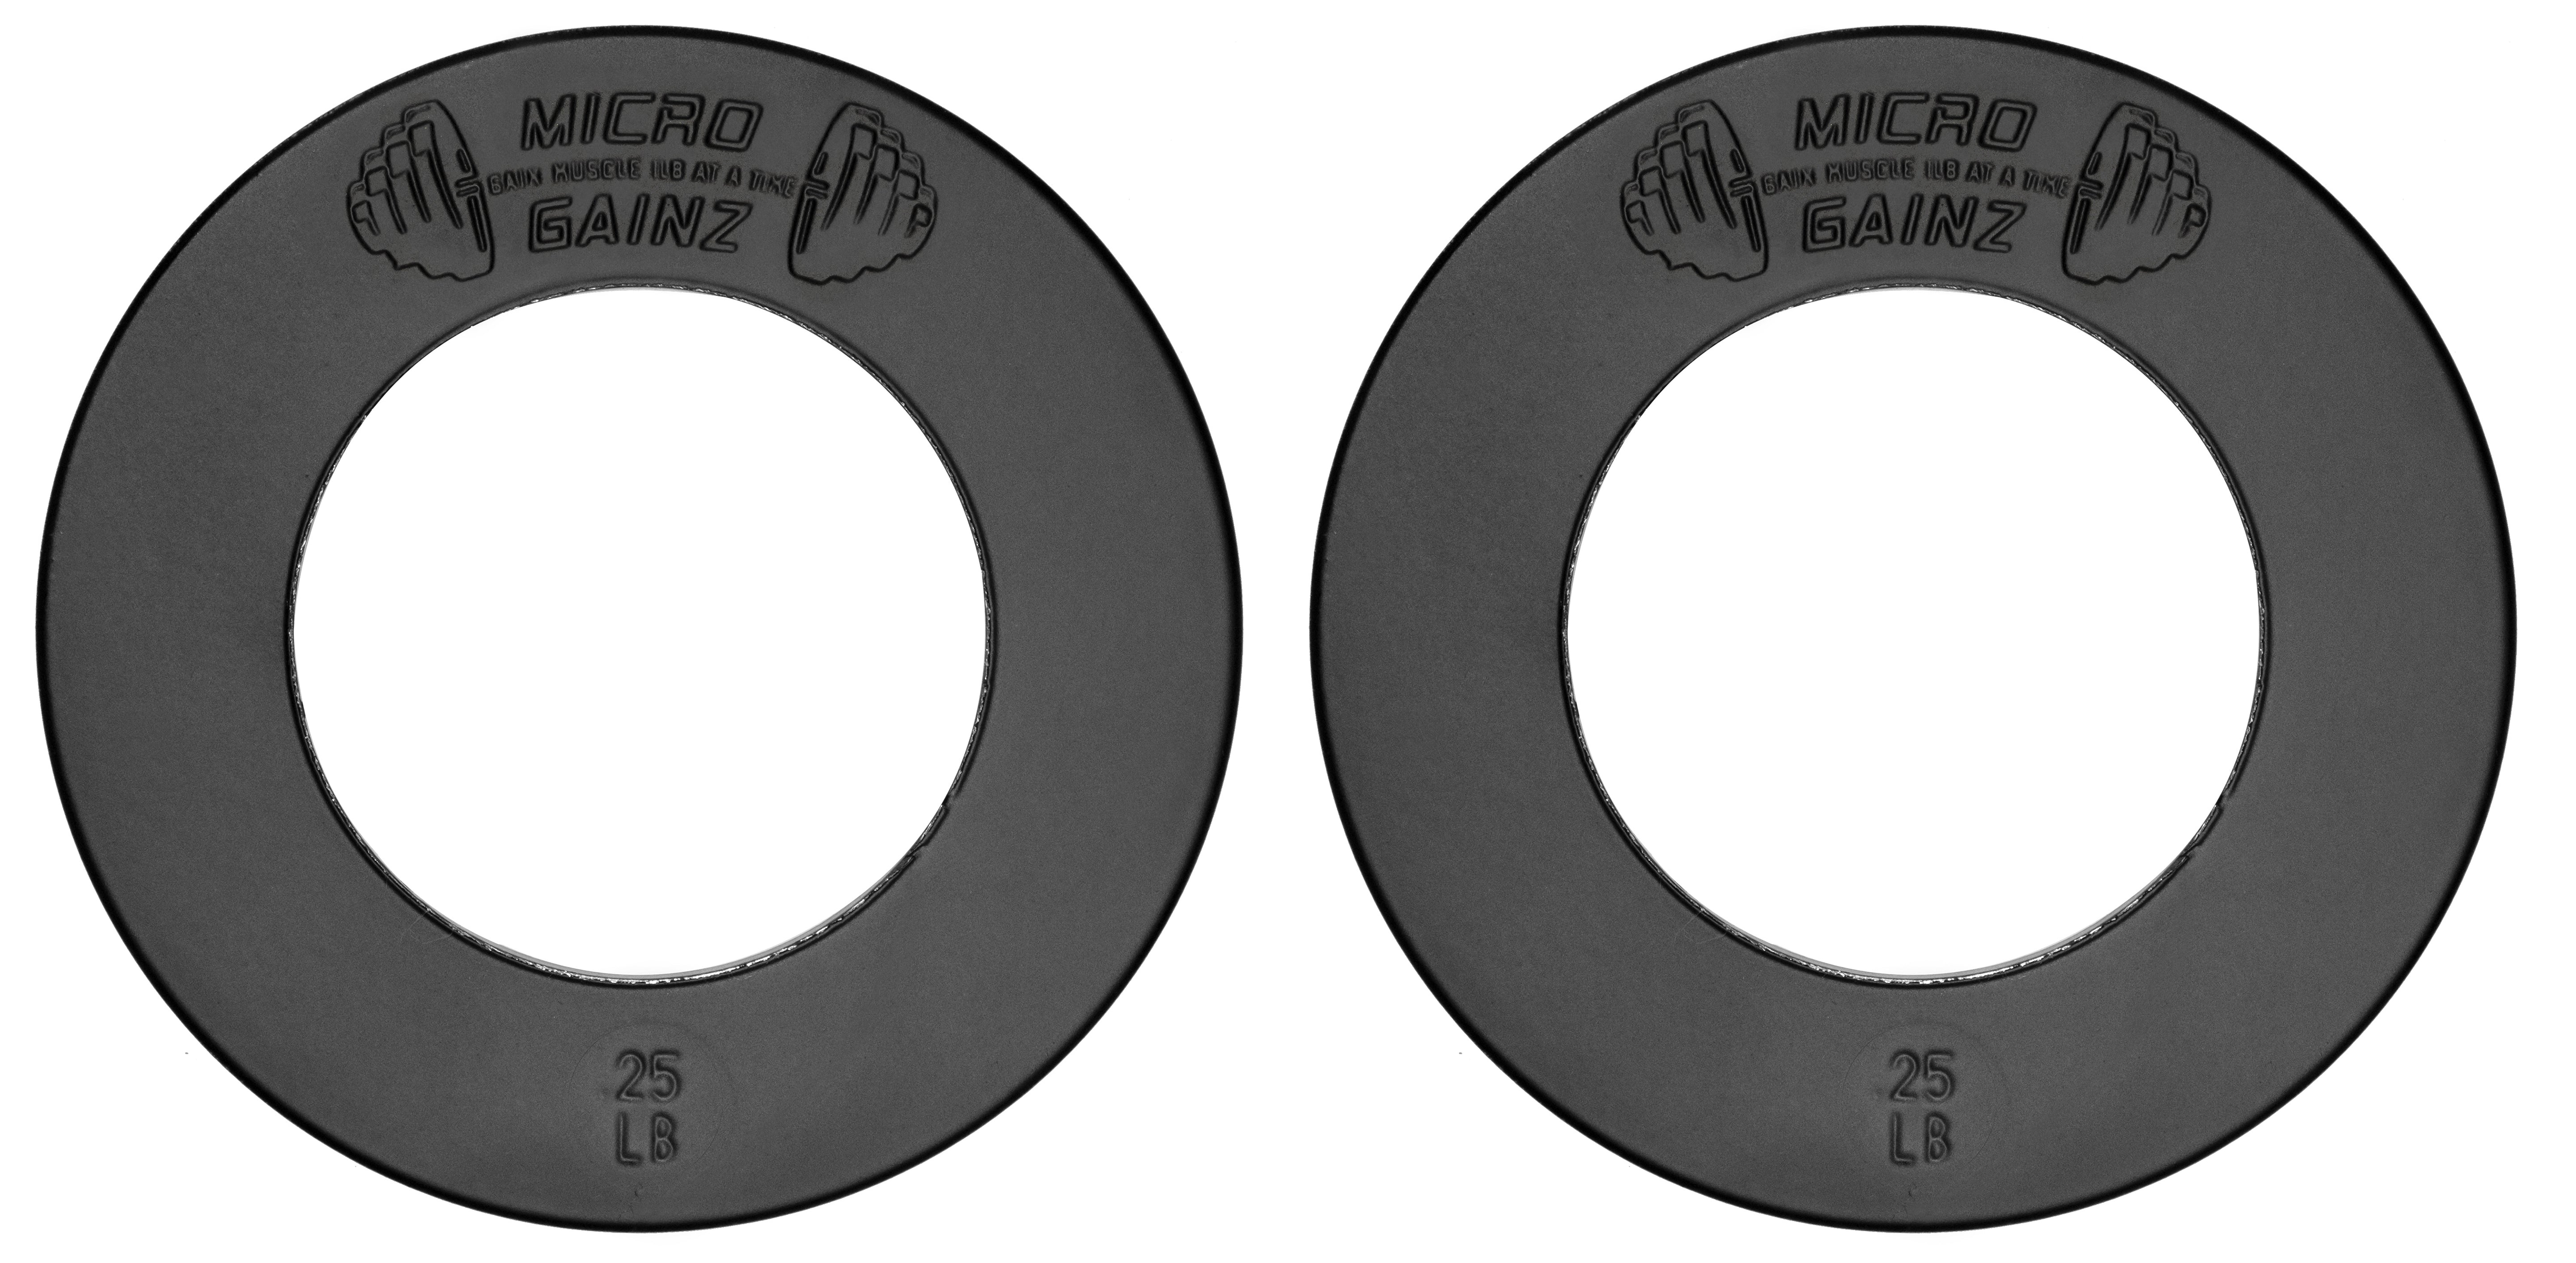 Micro Gainz Olympic Size Fractional Weight Plates Pair of .25LB Plates